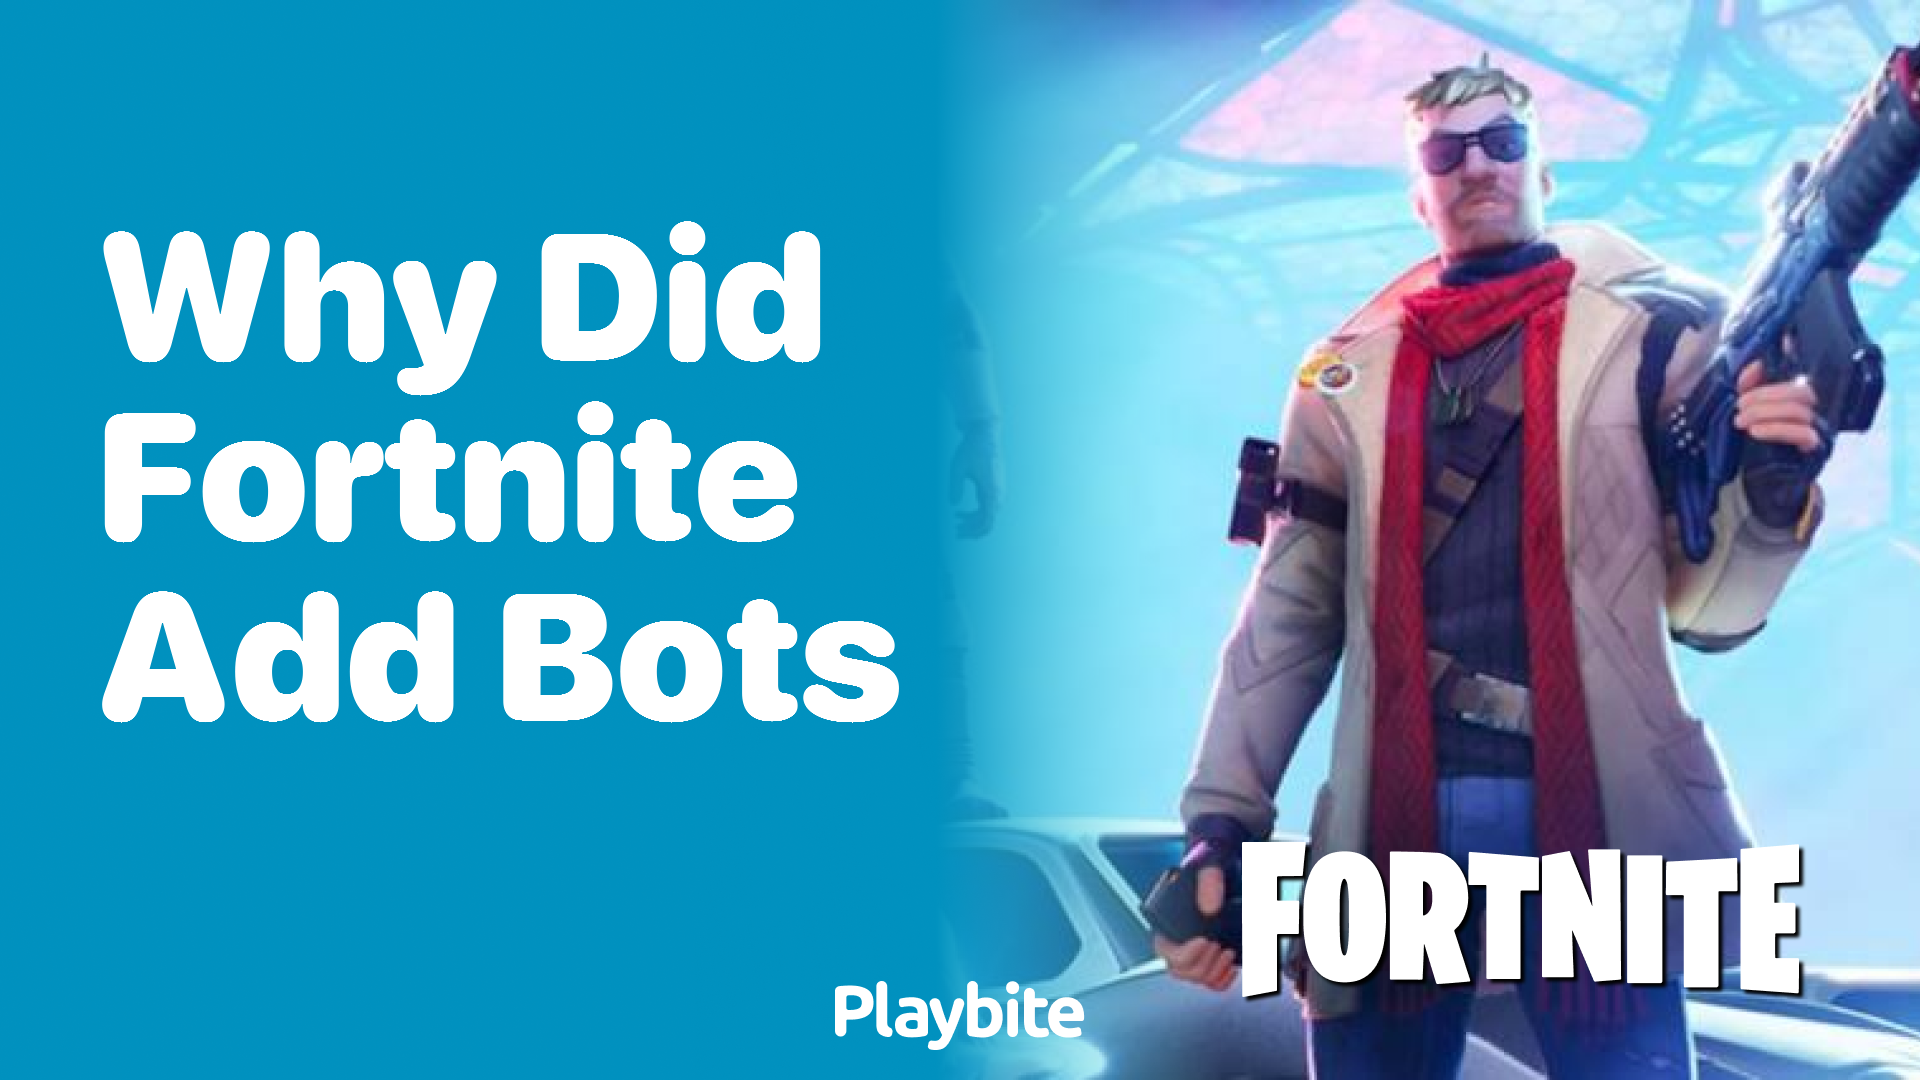 Why Did Fortnite Add Bots to the Game?